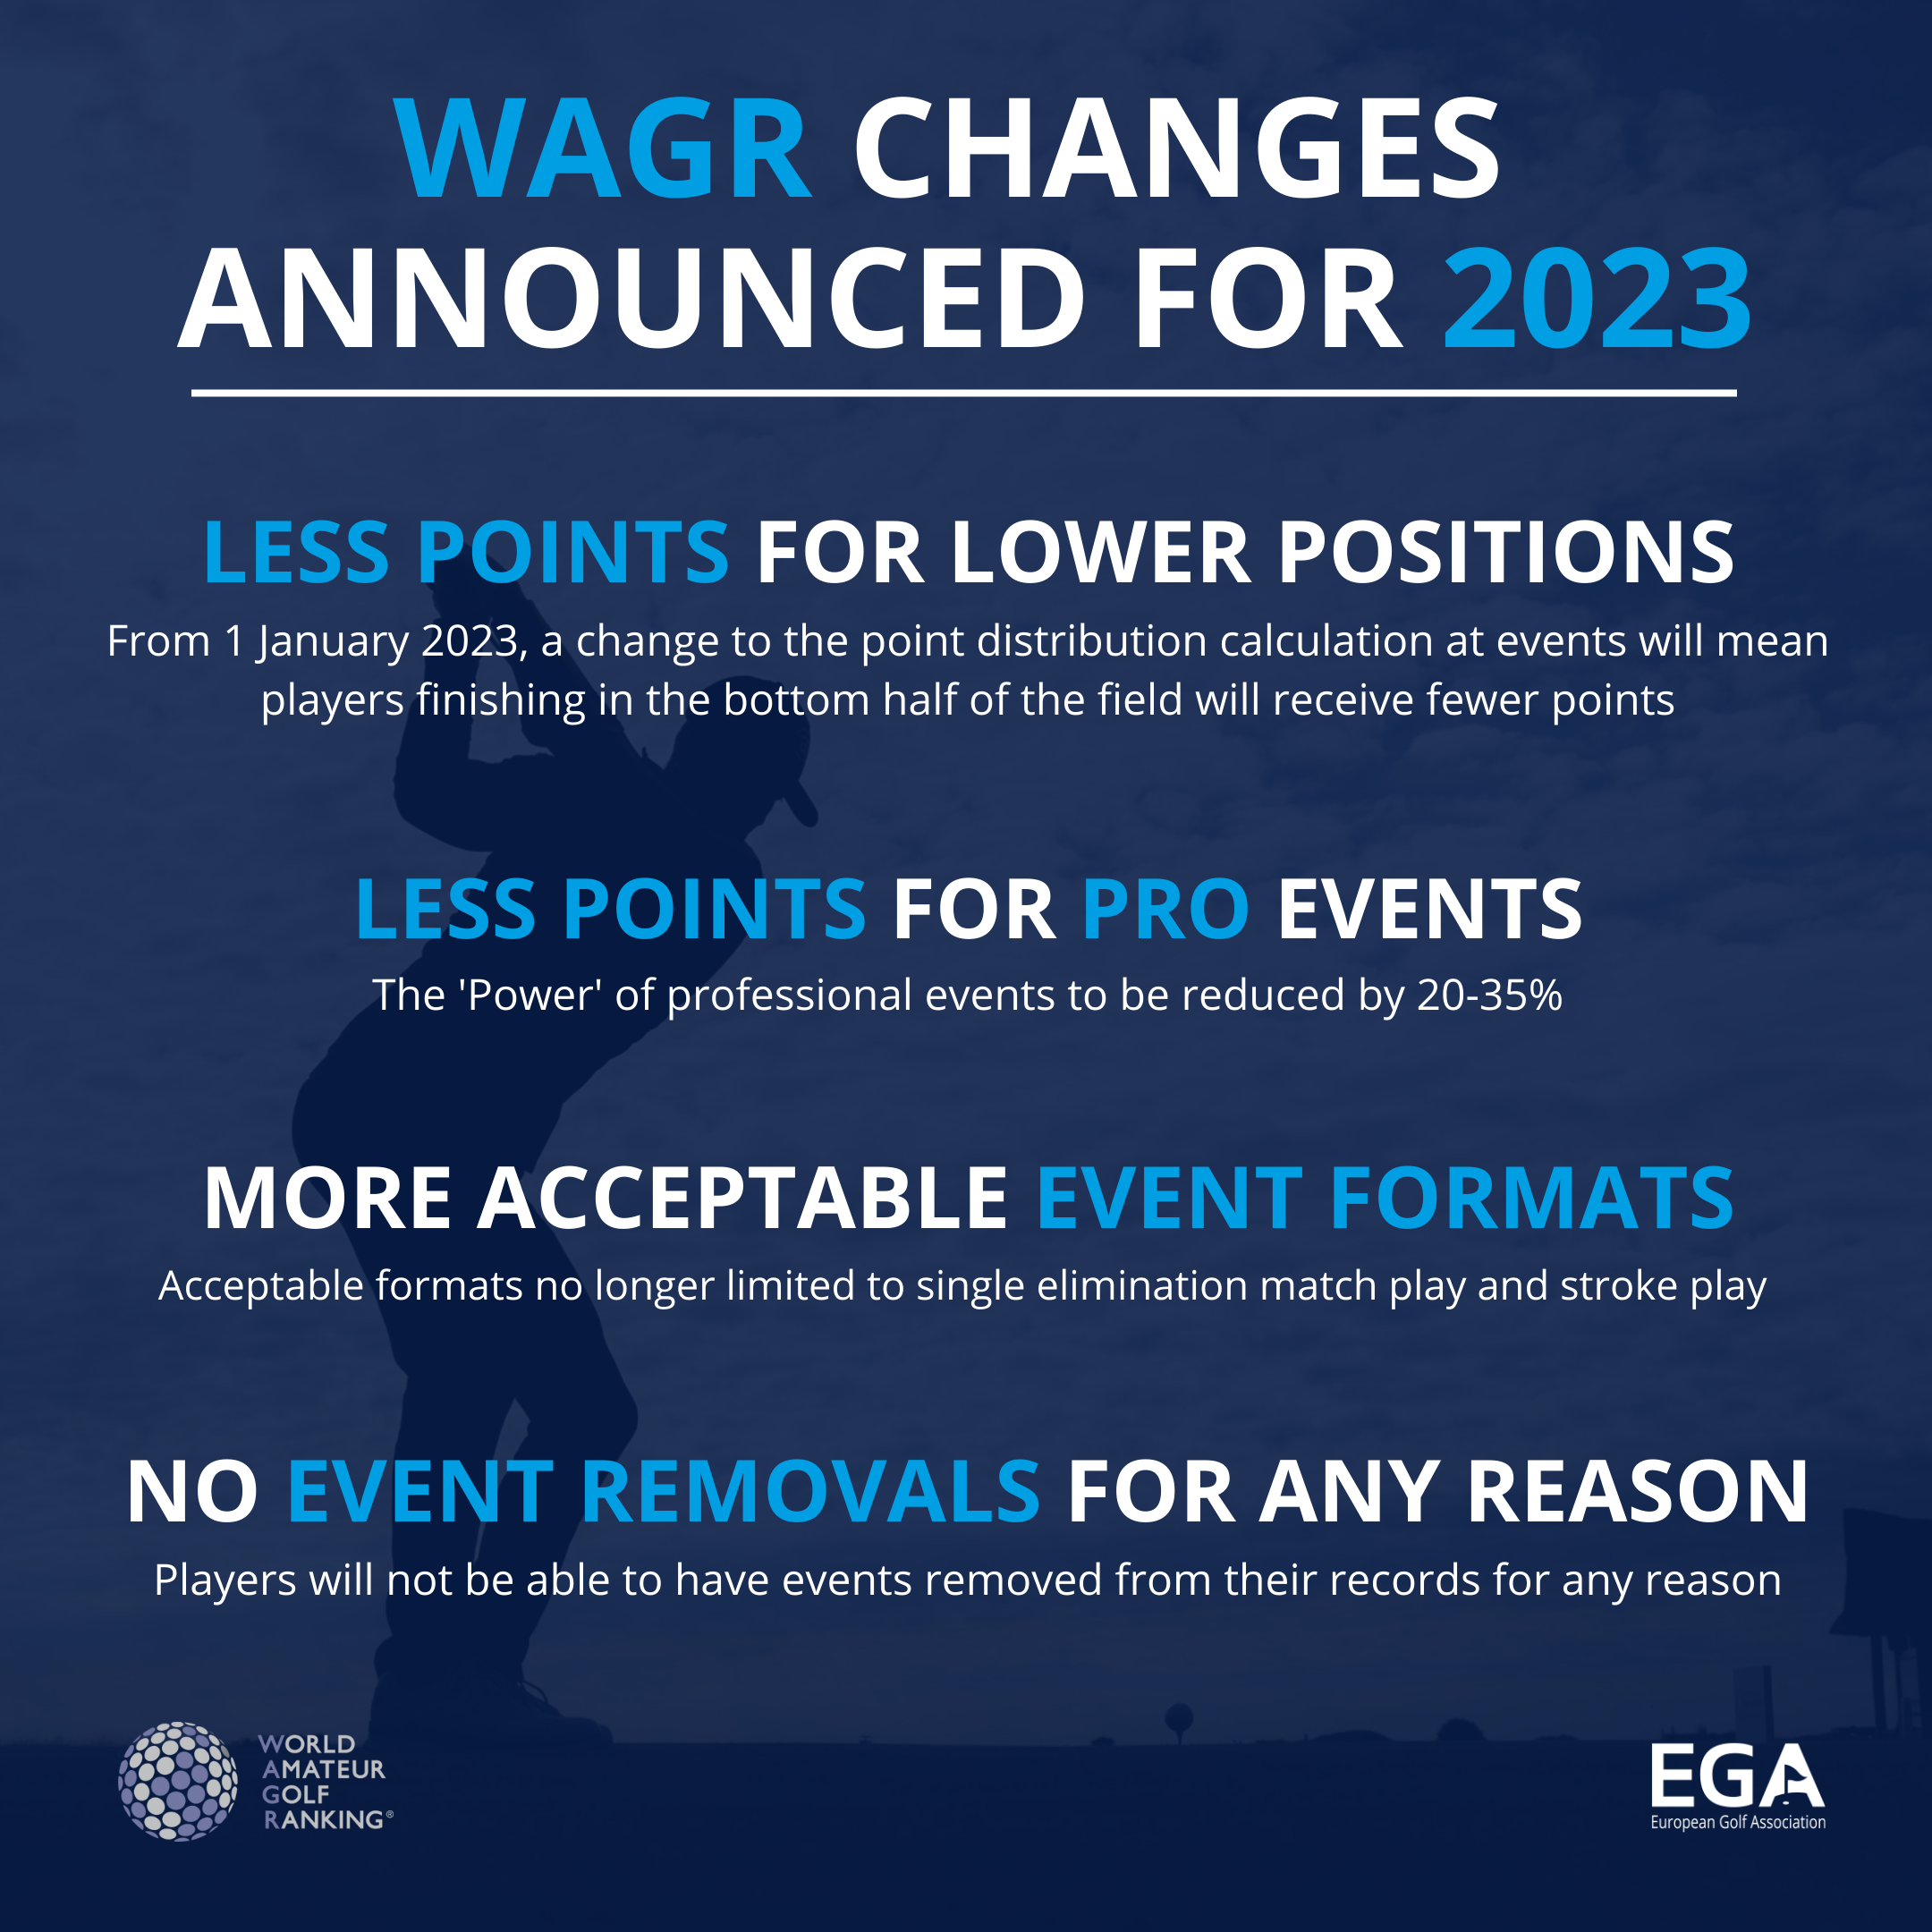 The 2022 is an official WAGR event!